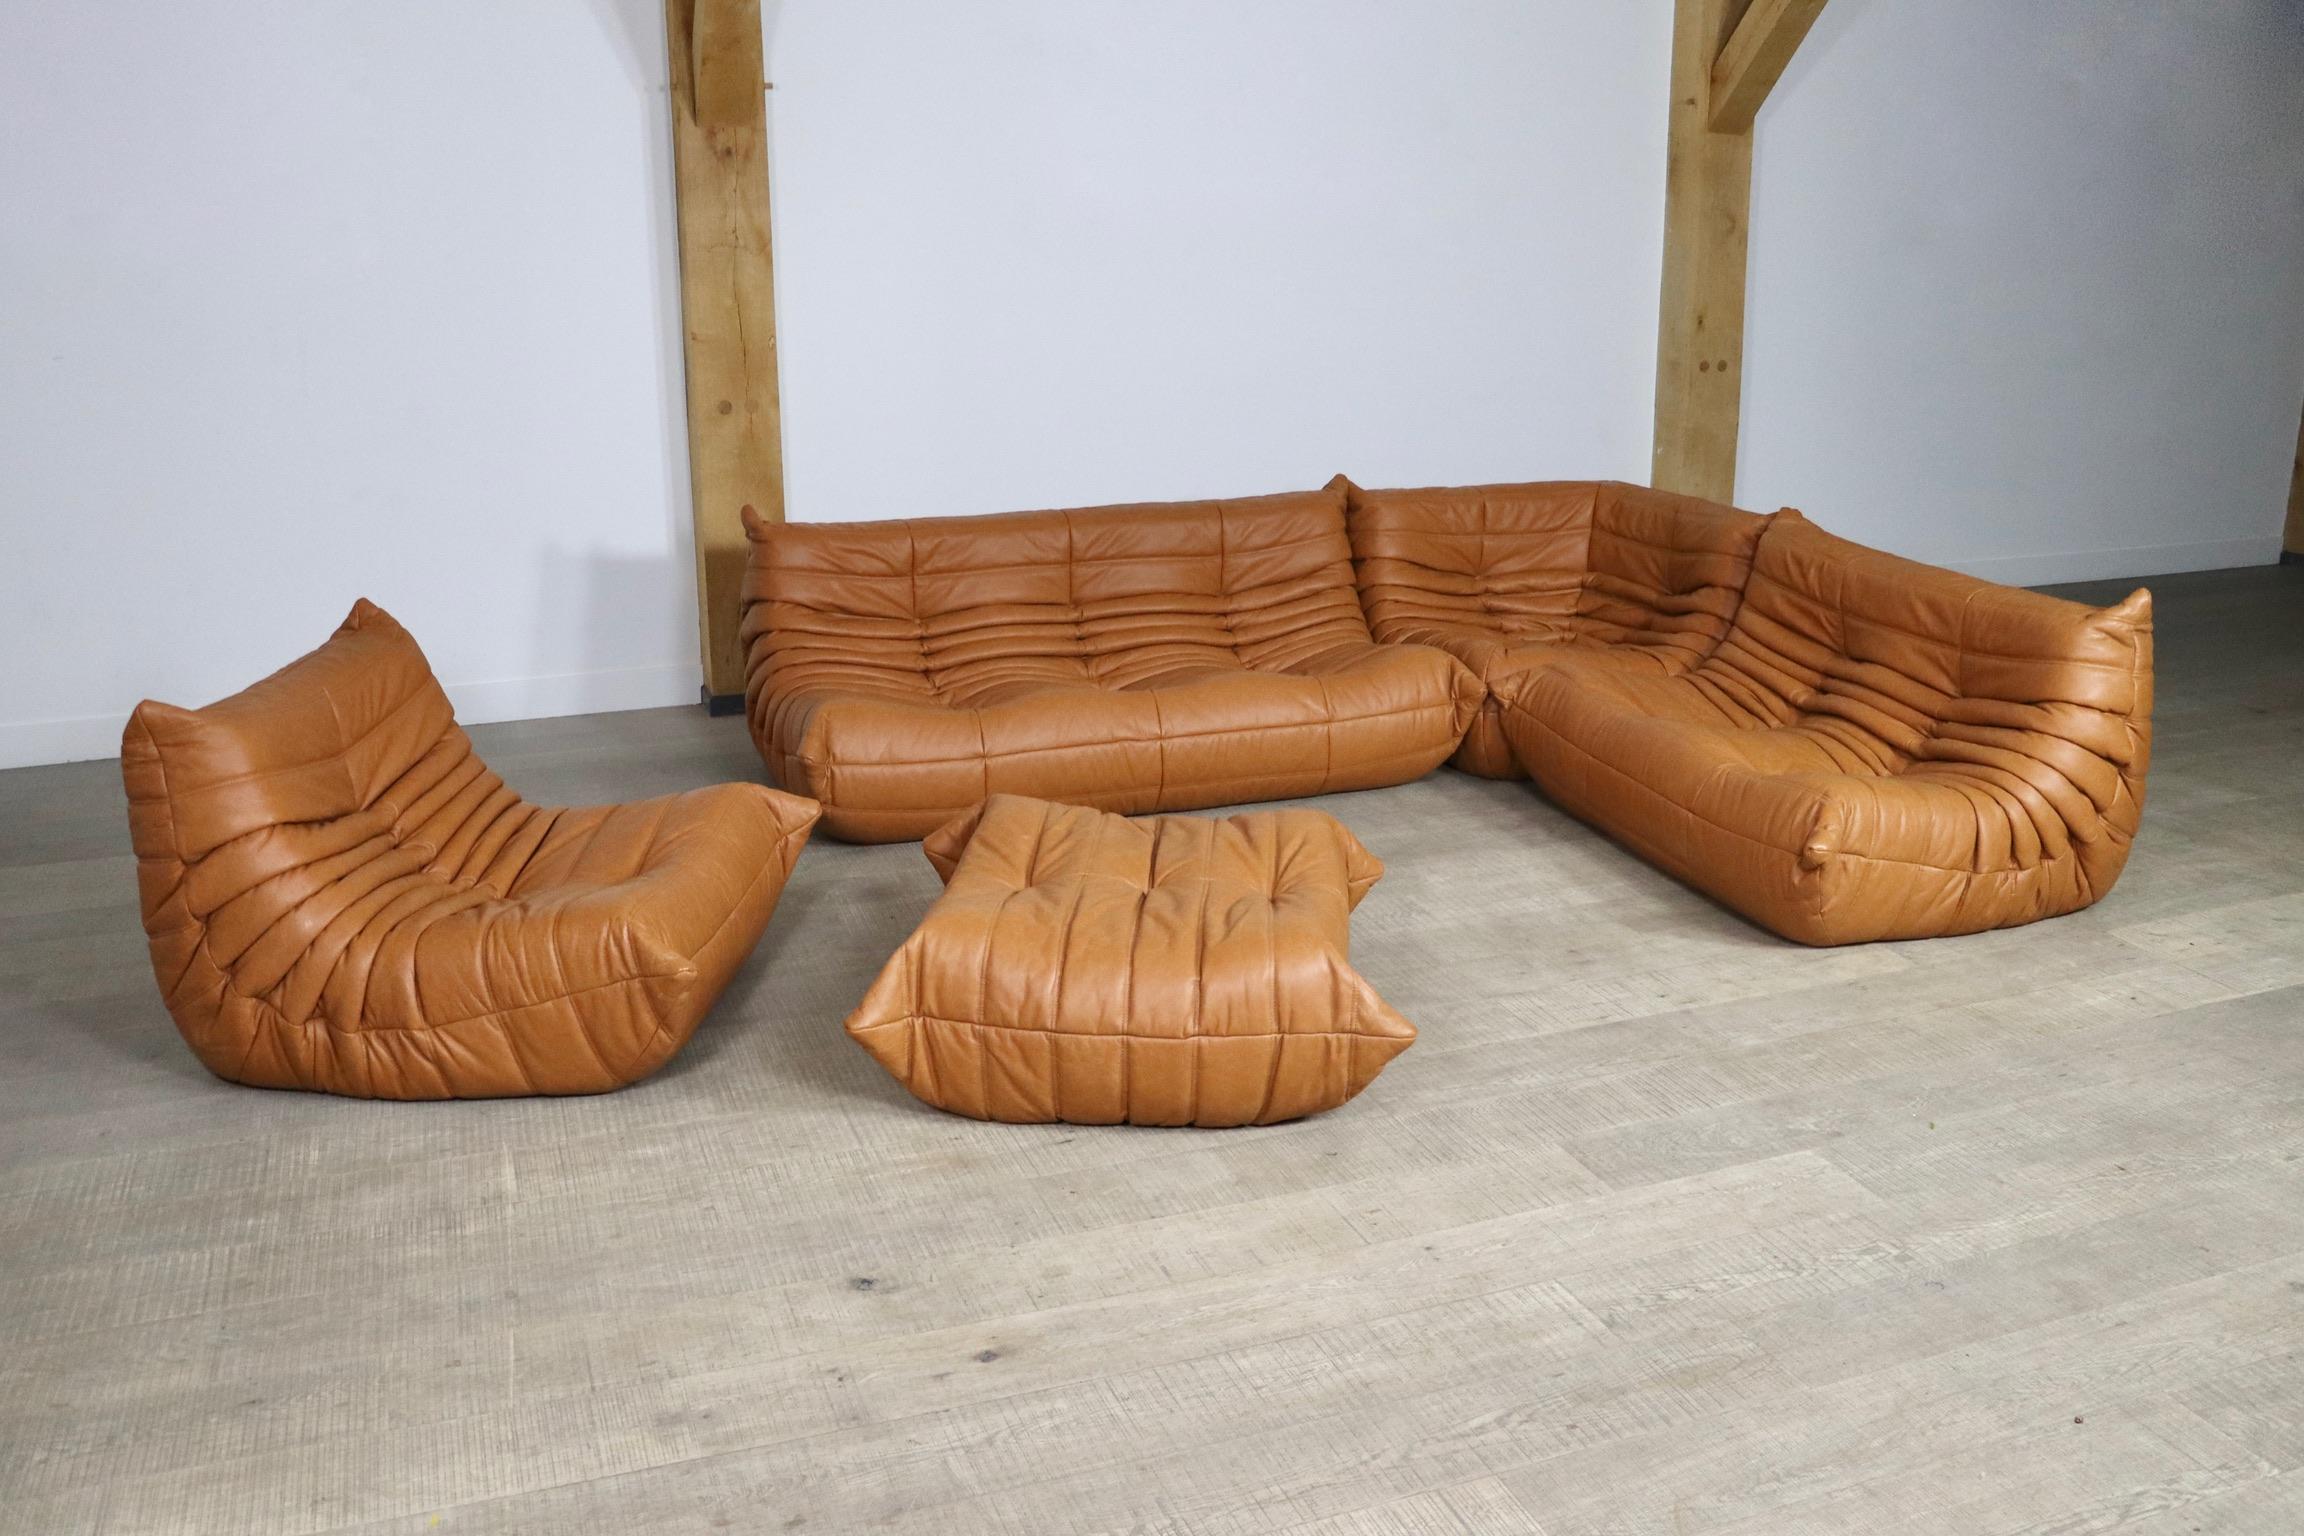 Beautiful cognac leather Togo seating group by Michel Ducaroy for Ligne Roset, 1980s. The entire seating group has the original Ligne Roset logo. The set consists of a 3-seaters, two seater, corner, a lounge chair and an ottoman. The beautiful soft